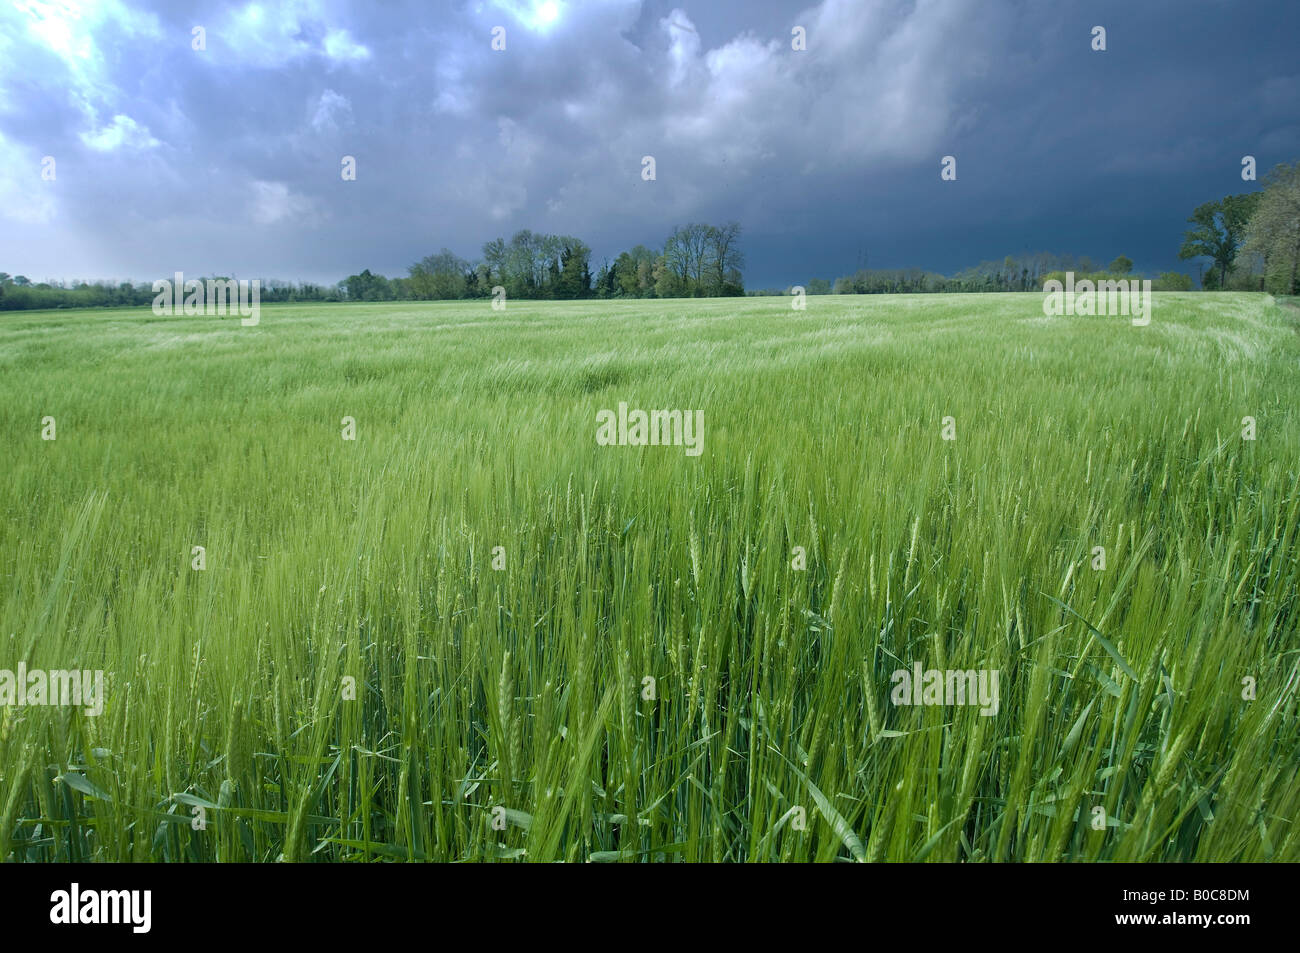 the wheat field during a storm Stock Photo